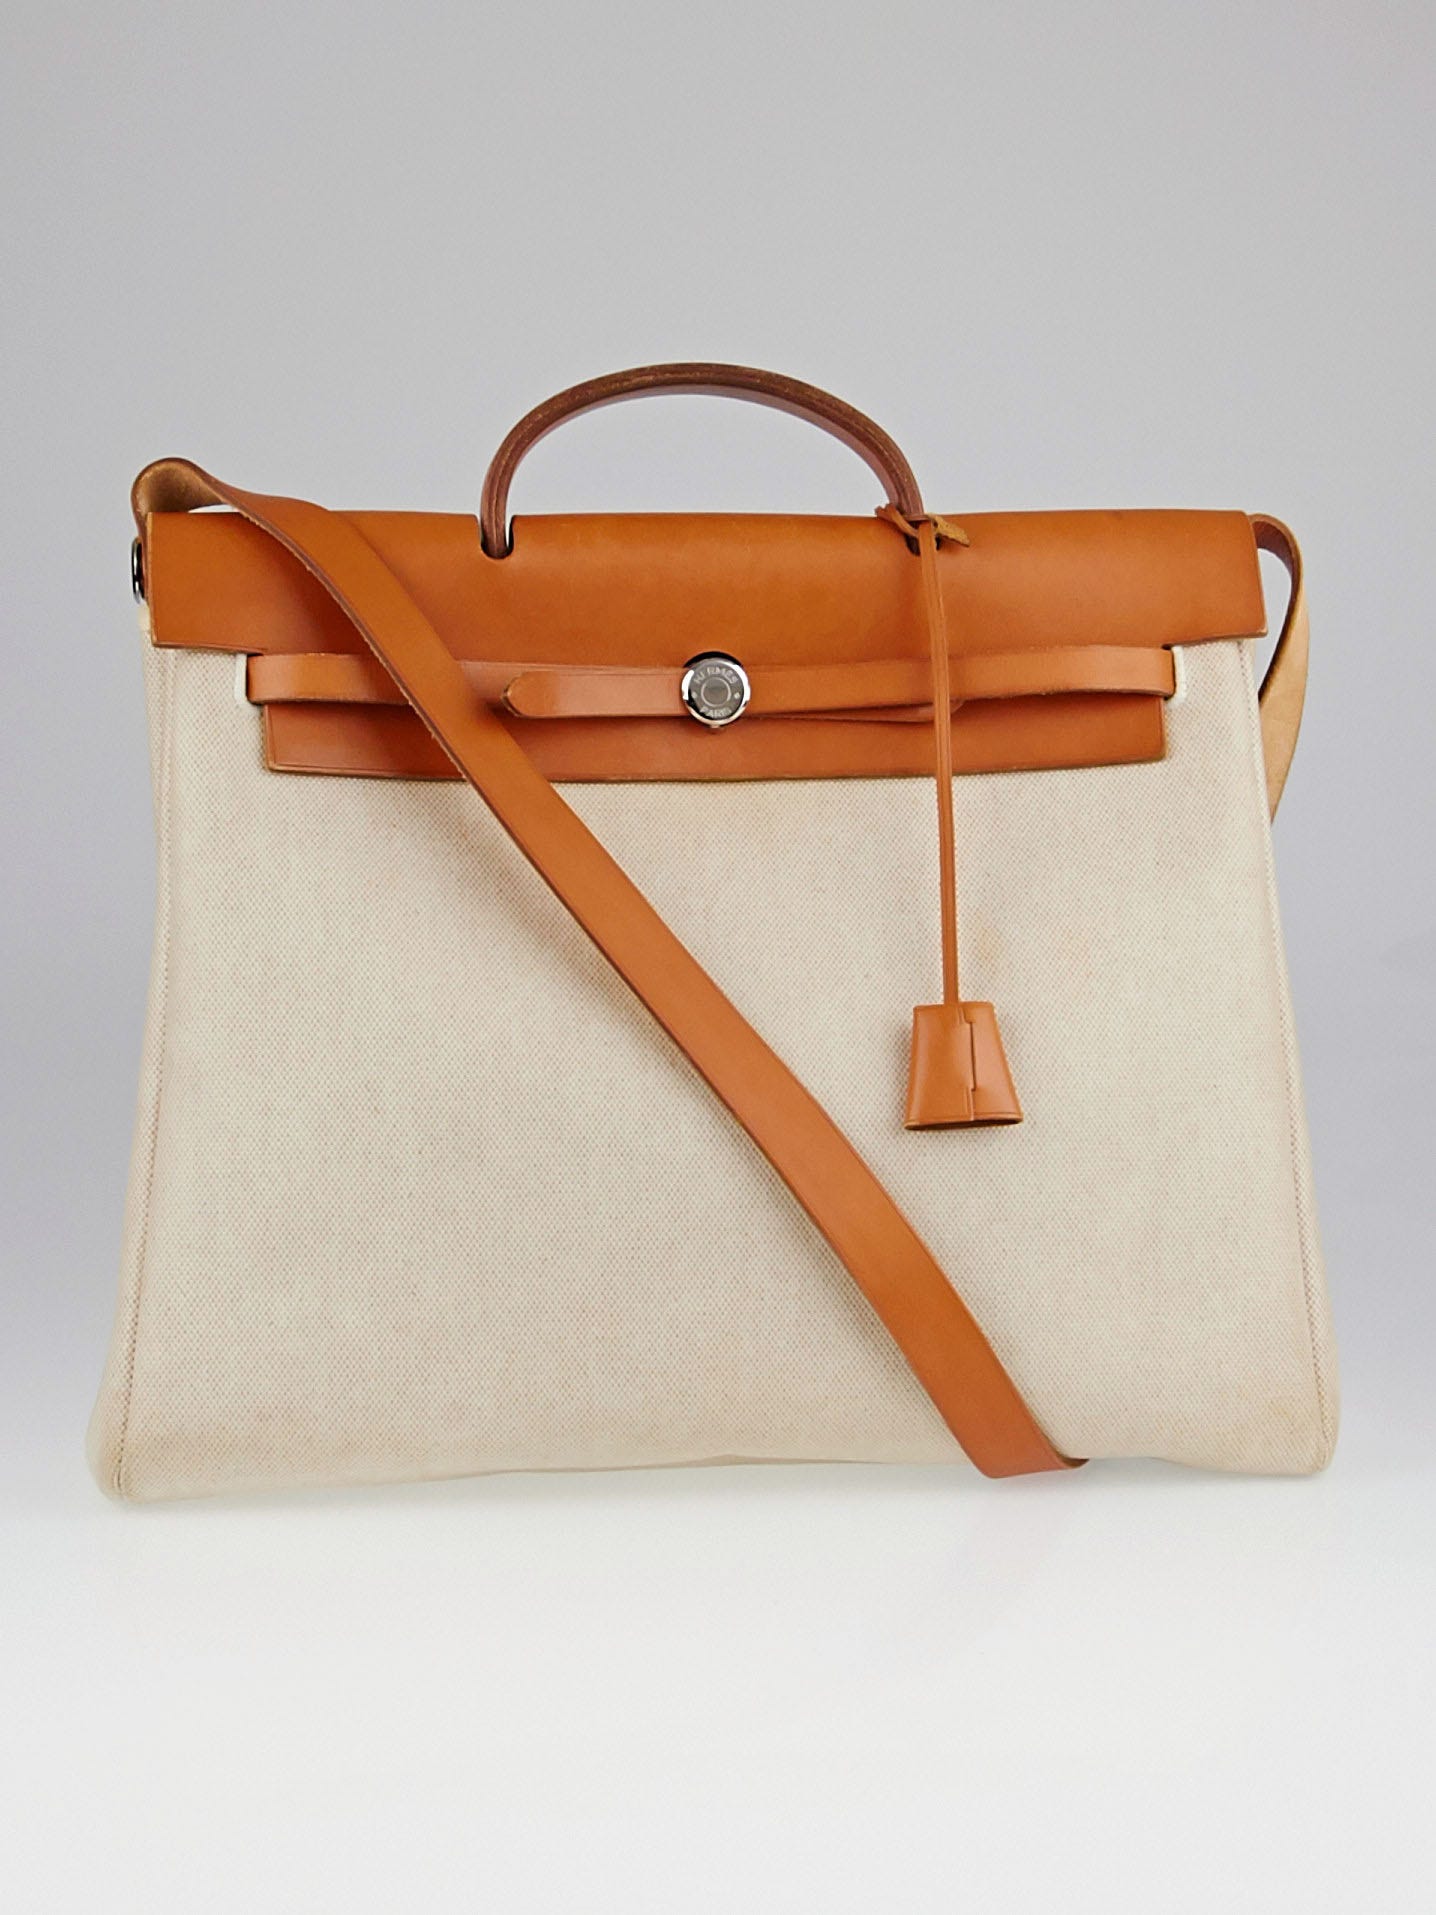 Hermes 35cm Natural Toile and Vache Calfskin Leather Herbag MM 2